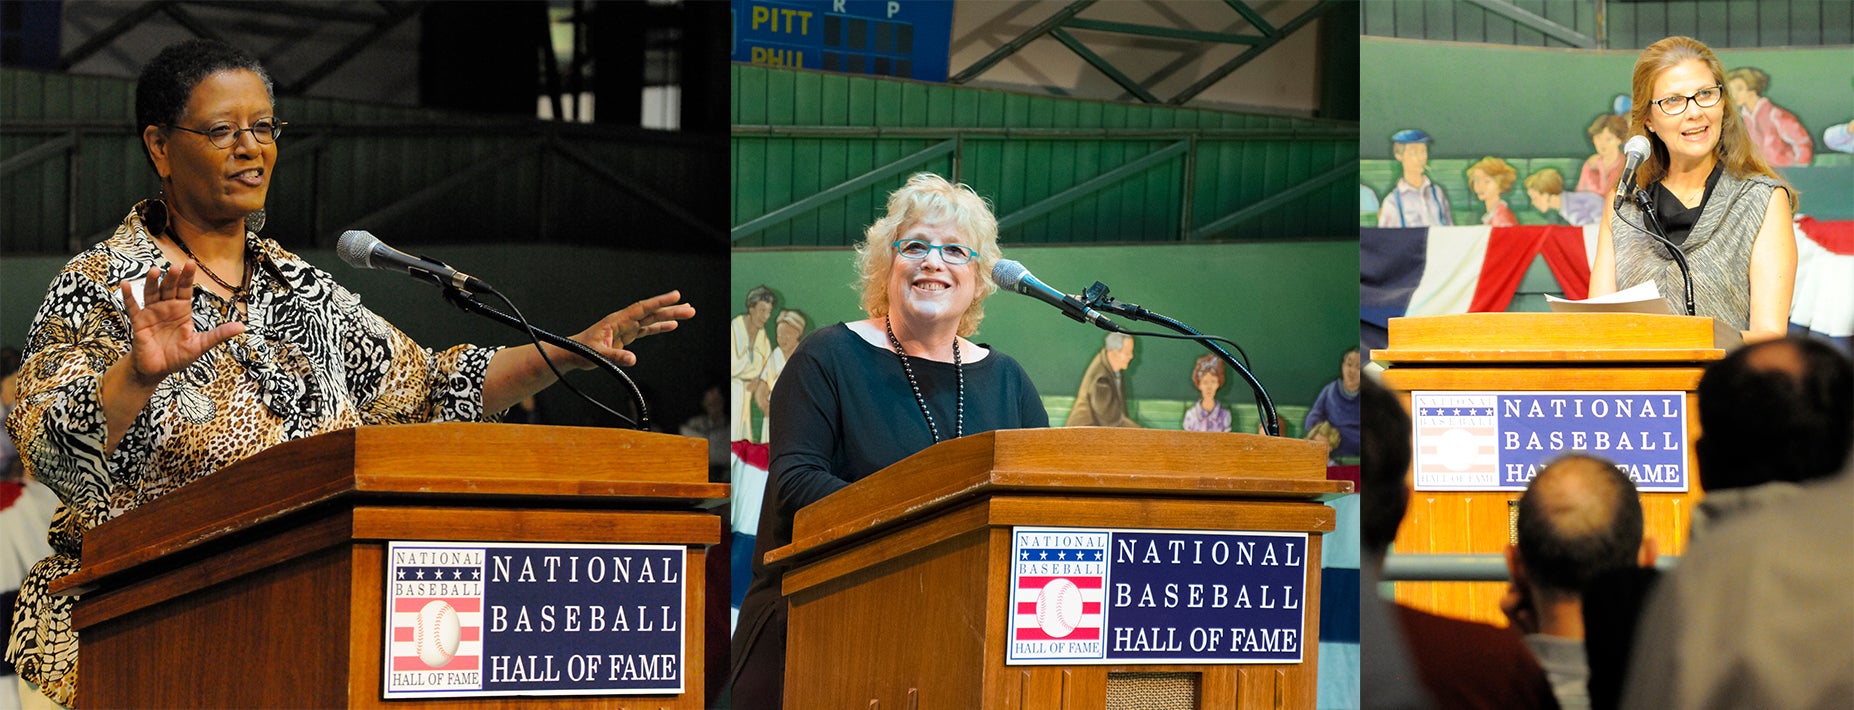 Cooperstown Symposium sees increase in female participation